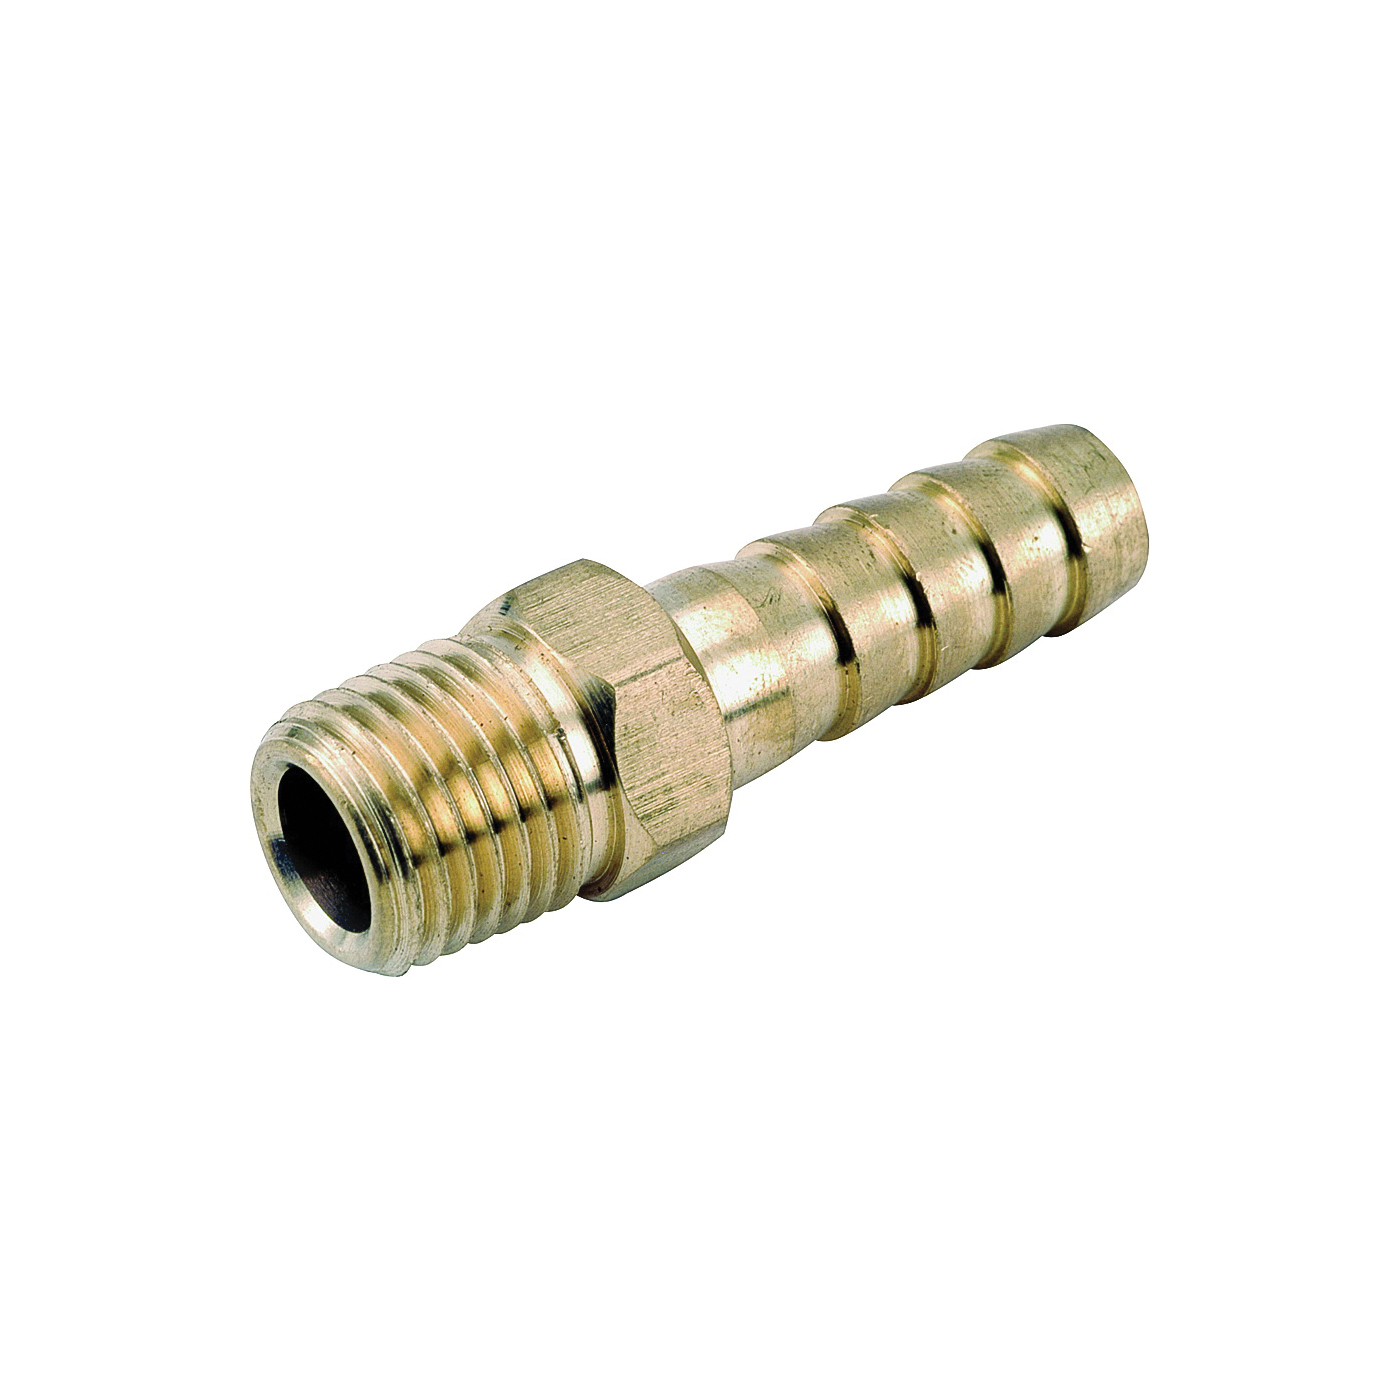 129 Series 757001-0602 Hose Adapter, 3/8 in, Barb, 1/8 in, MPT, Brass